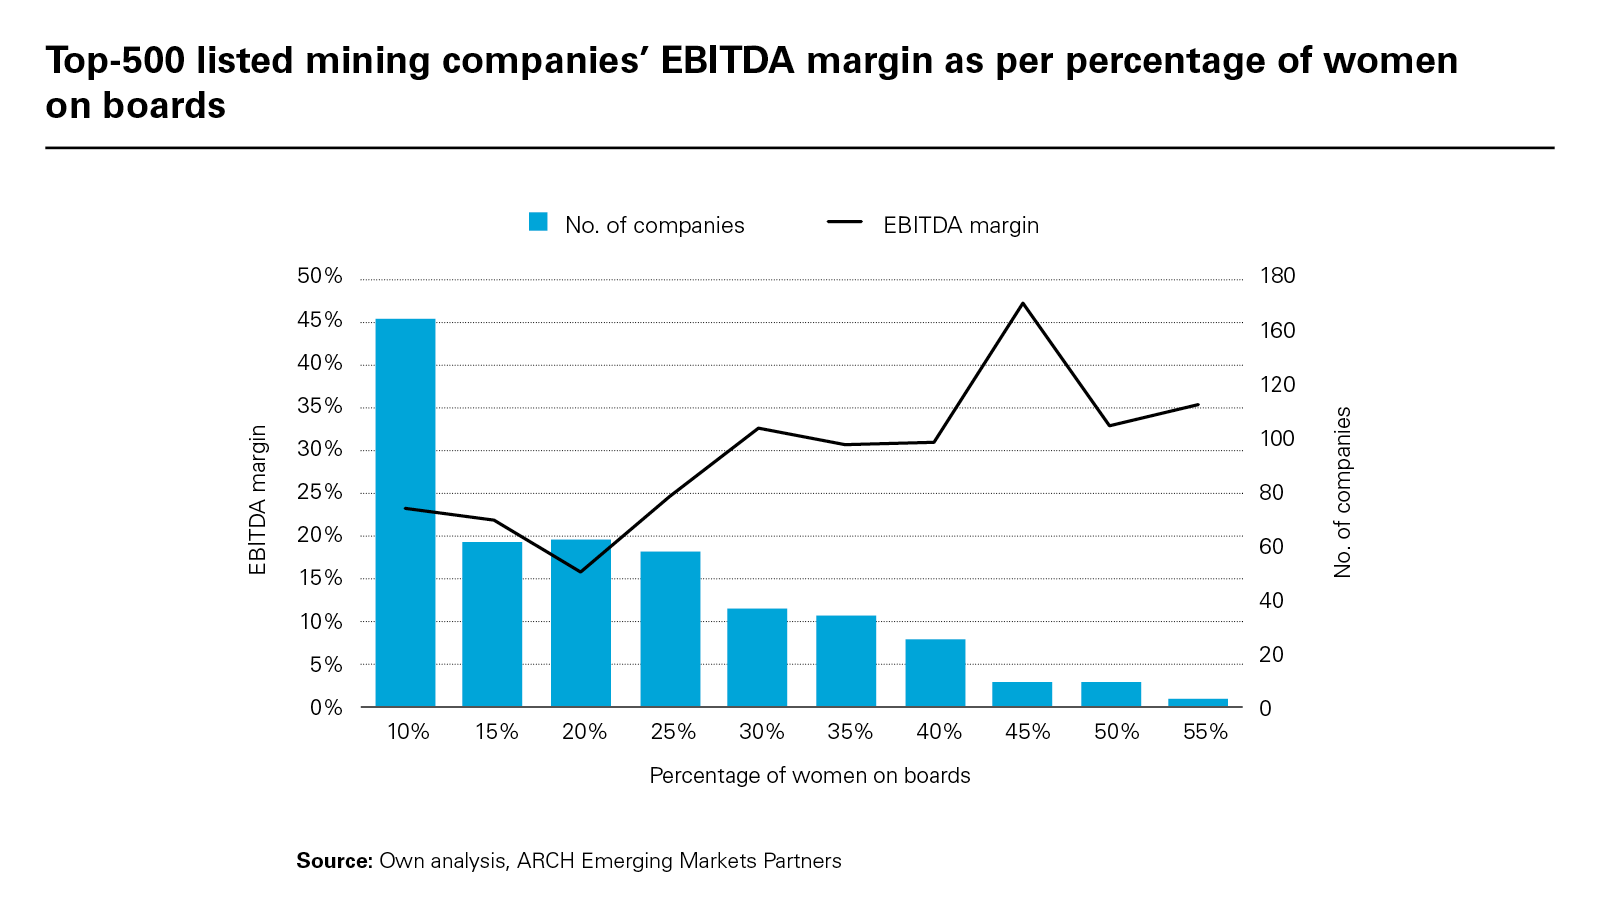 Top-500 listed mining companies’ EBITDA margin as per percentage of women on boards